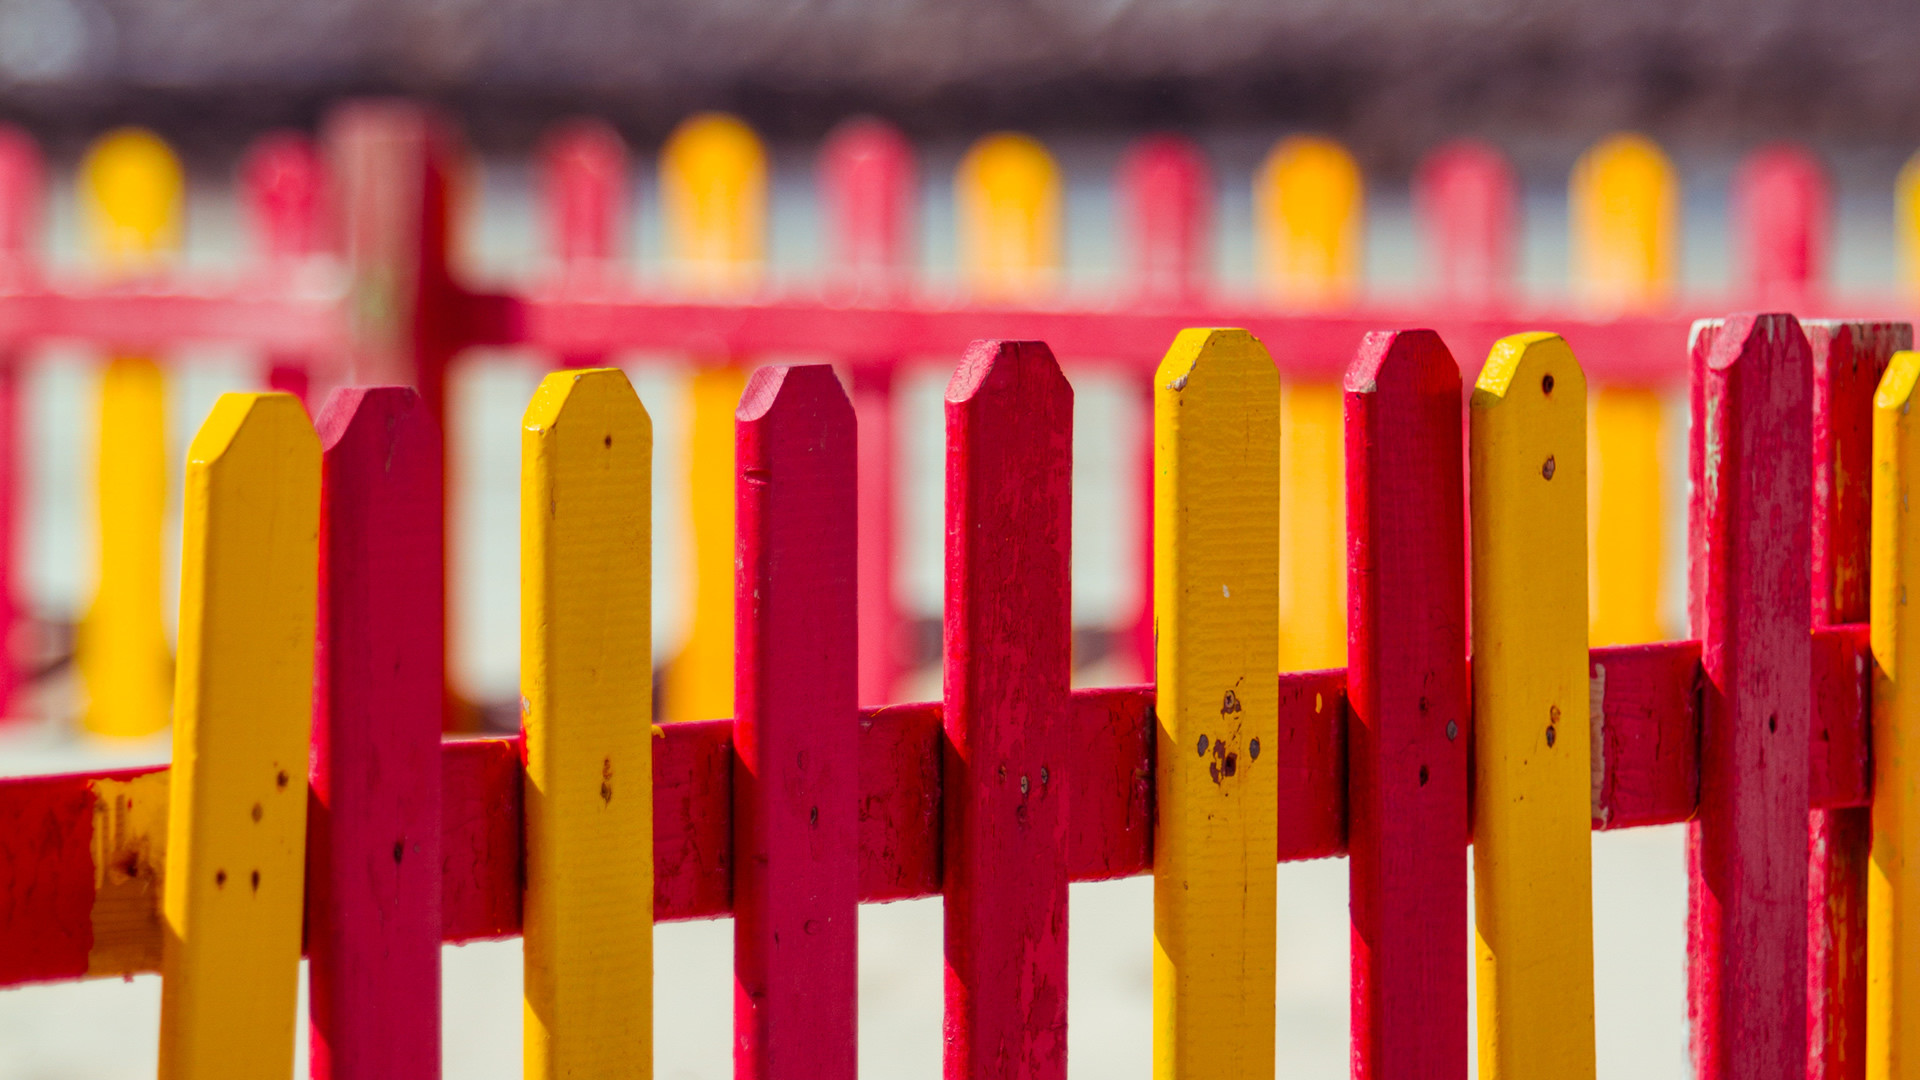 Download: Colored Fence HD Wallpaper